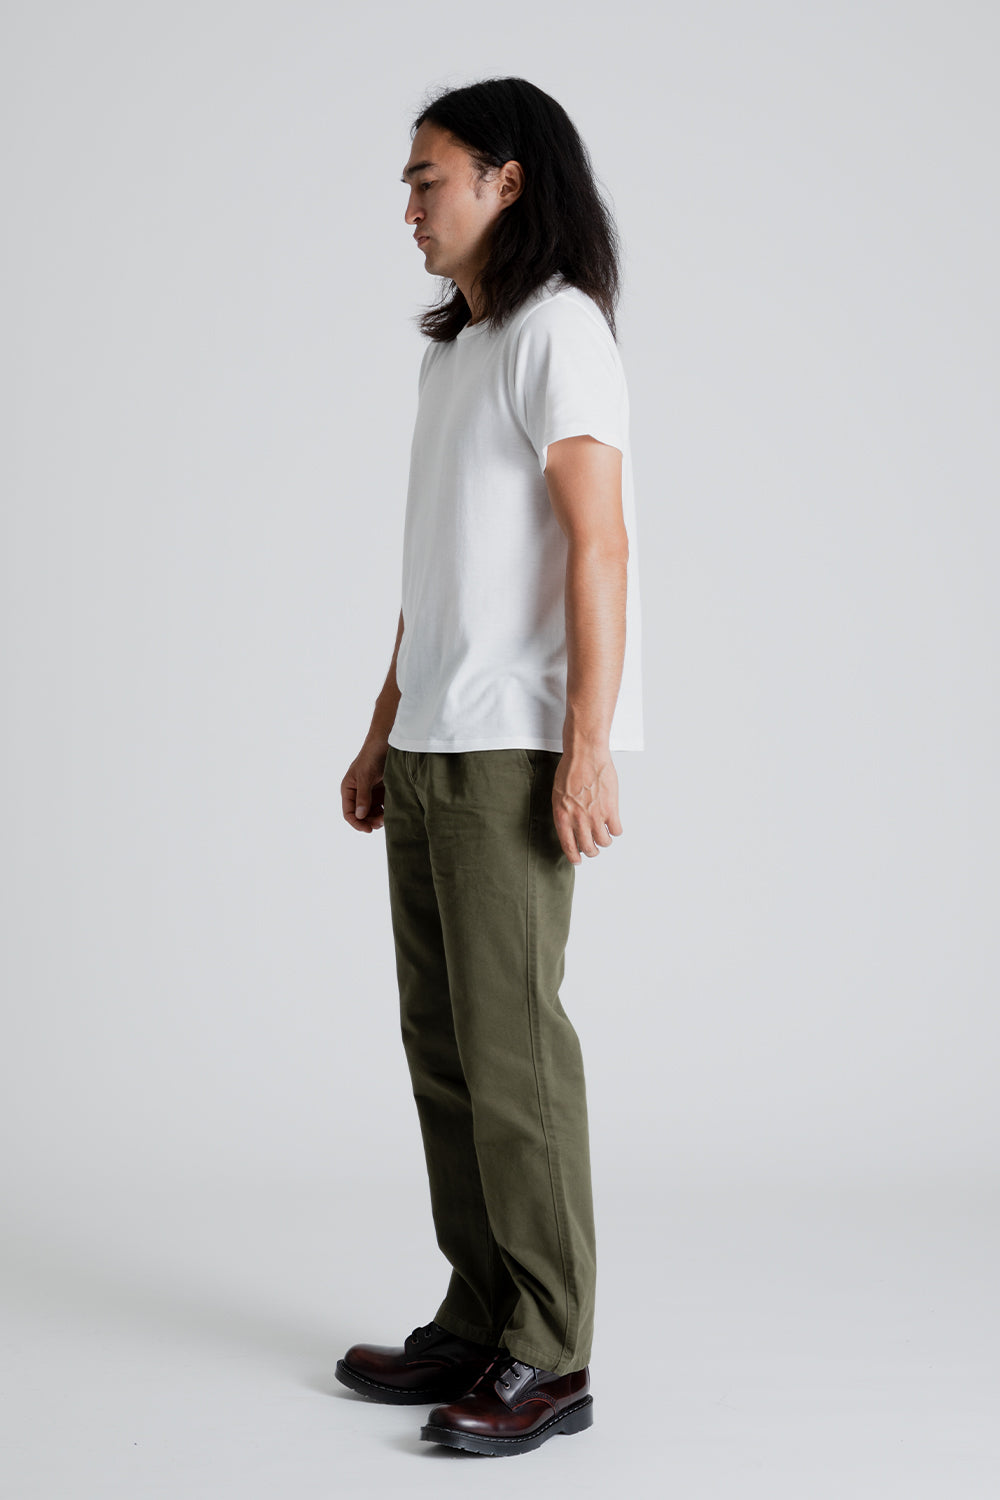 Forét Brook Chino in Army Green